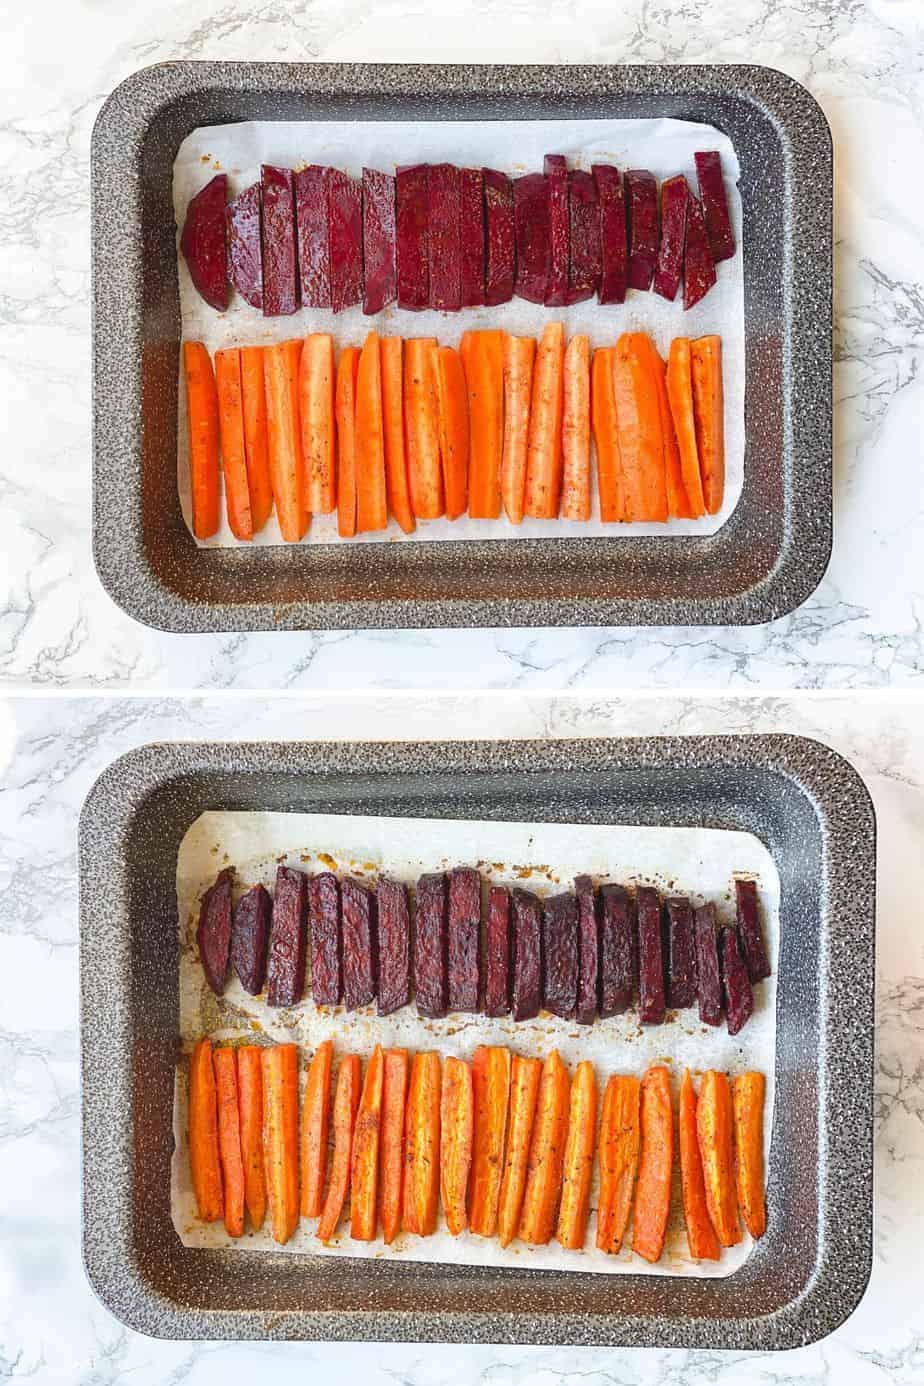 Carrots and beets are such a healthy, sweet and delicious vegetables, that are perfect to accompany any main course or to enjoy on their own as a snack. Kids love them too! - The Yummy Bowl